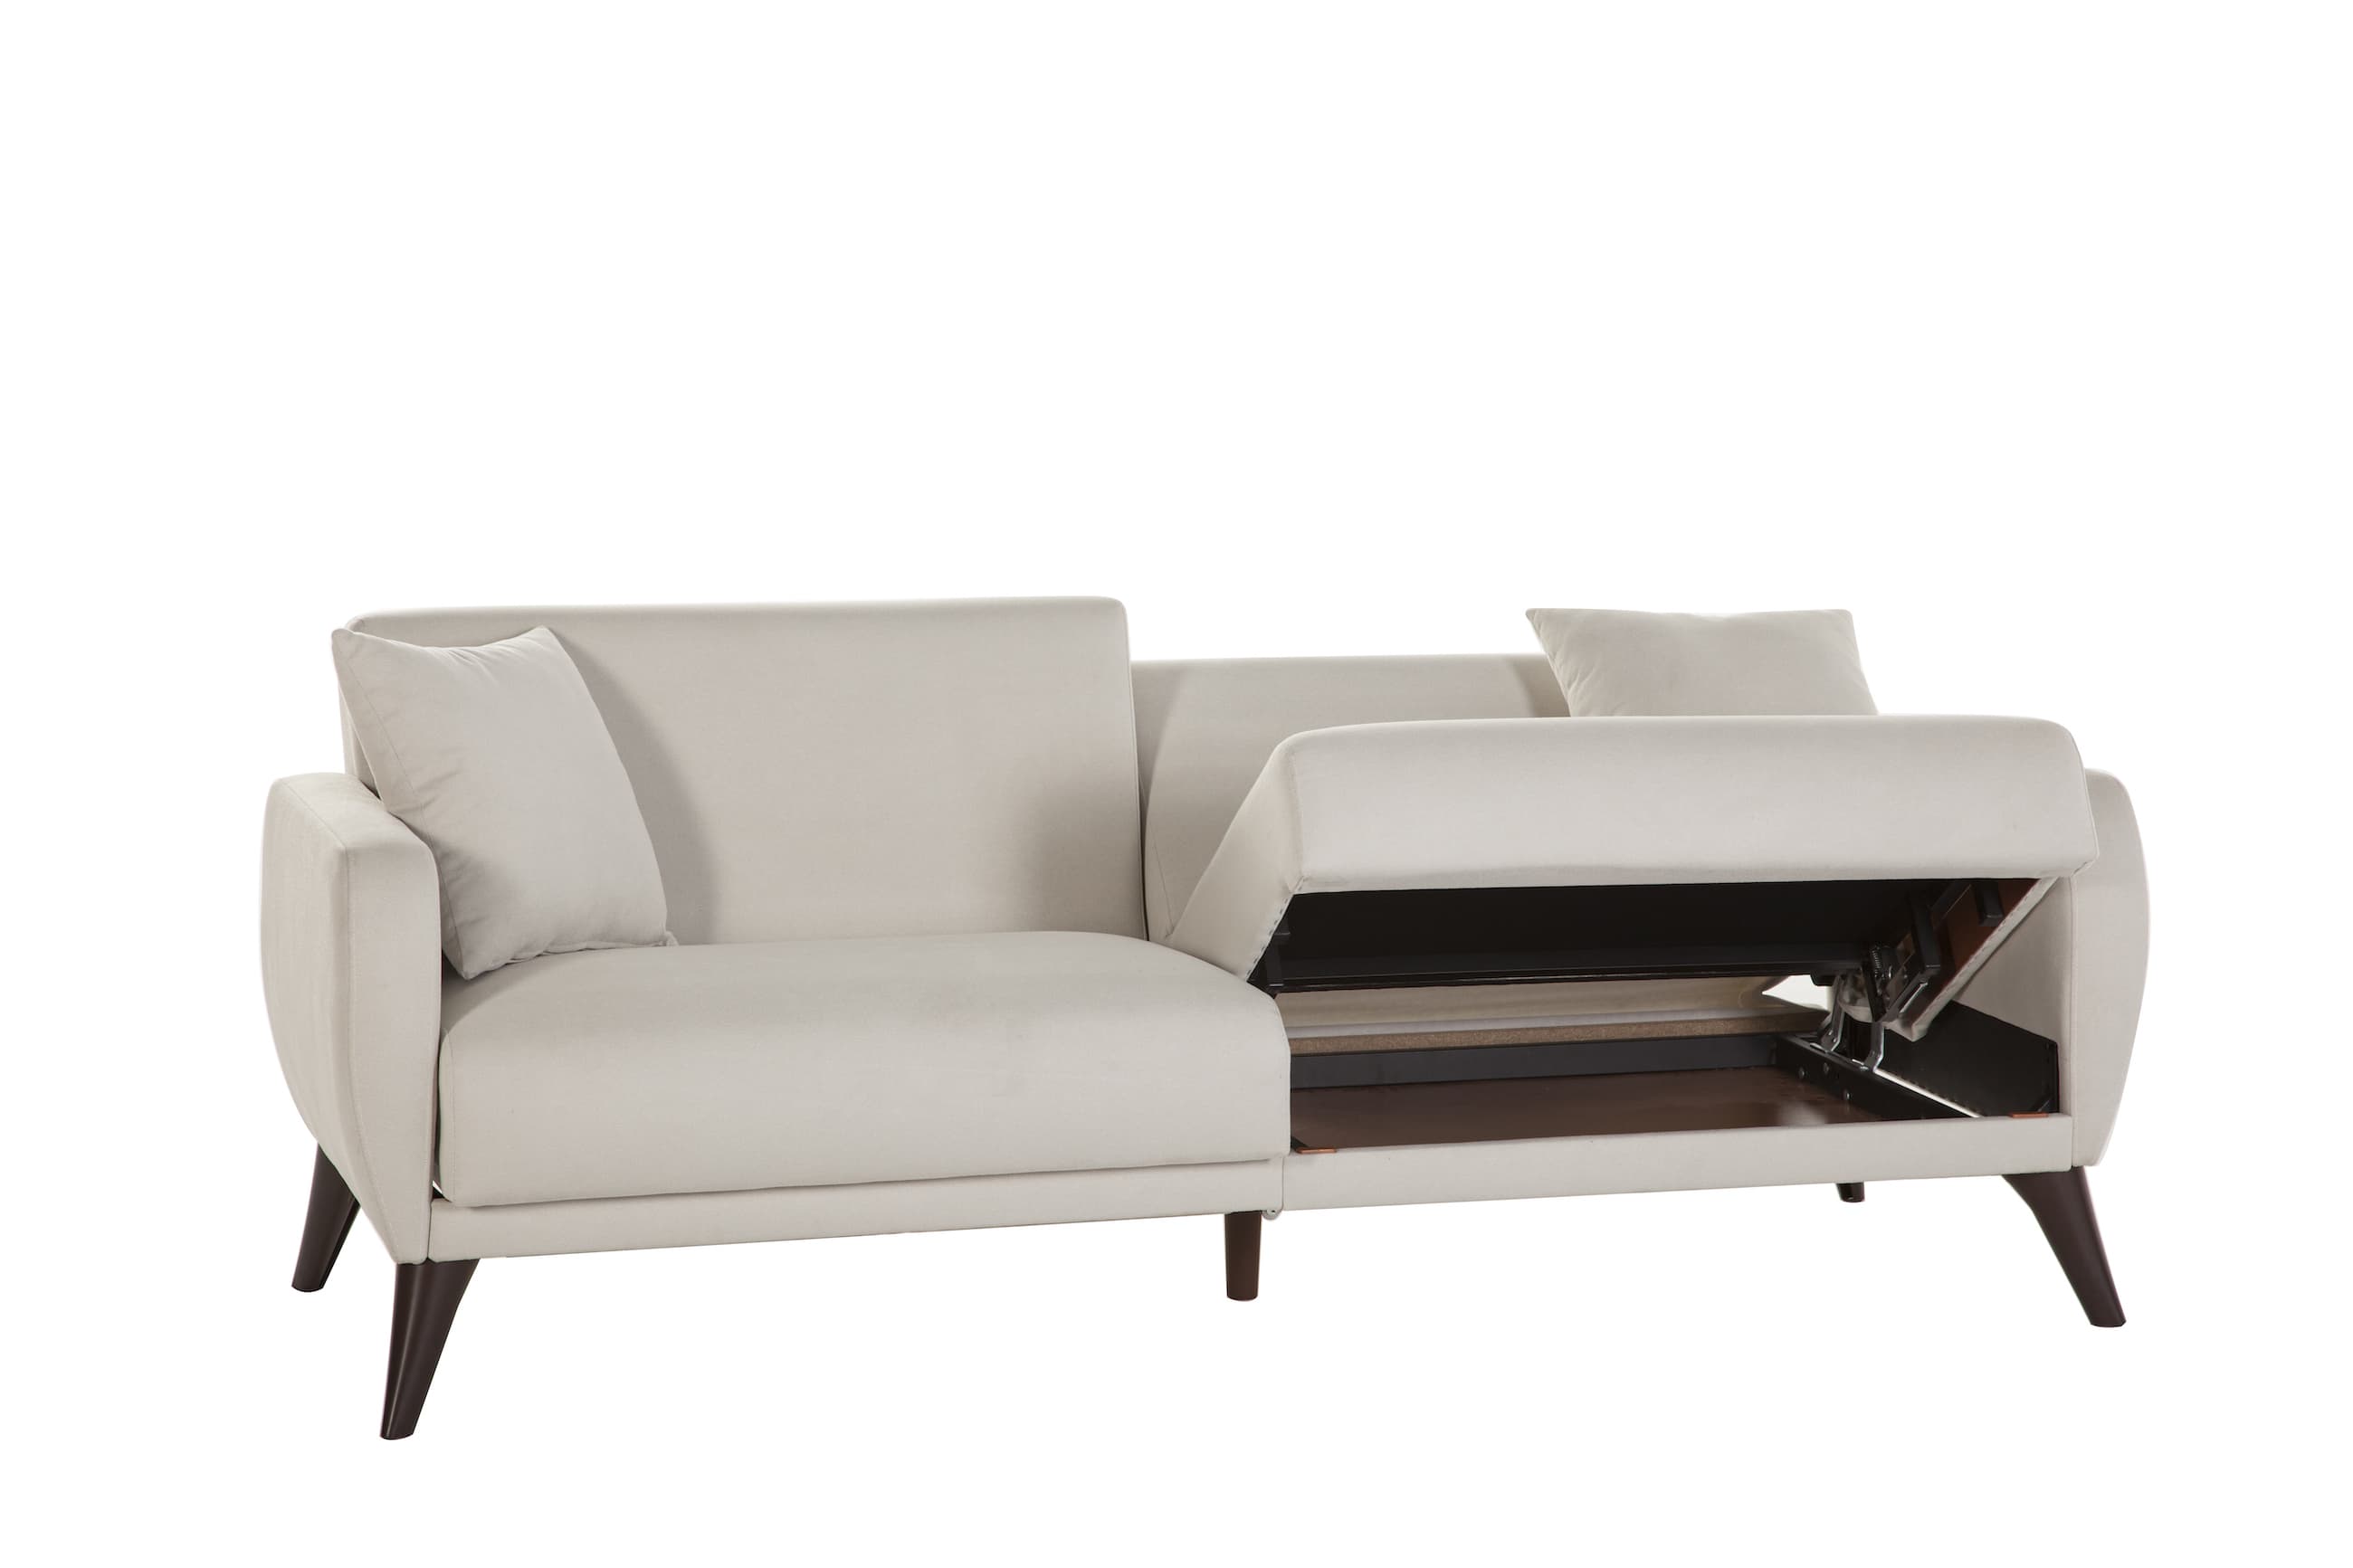 Flexy Convertible Sofa-in-a-Box (Zigana Beige) by Bellona